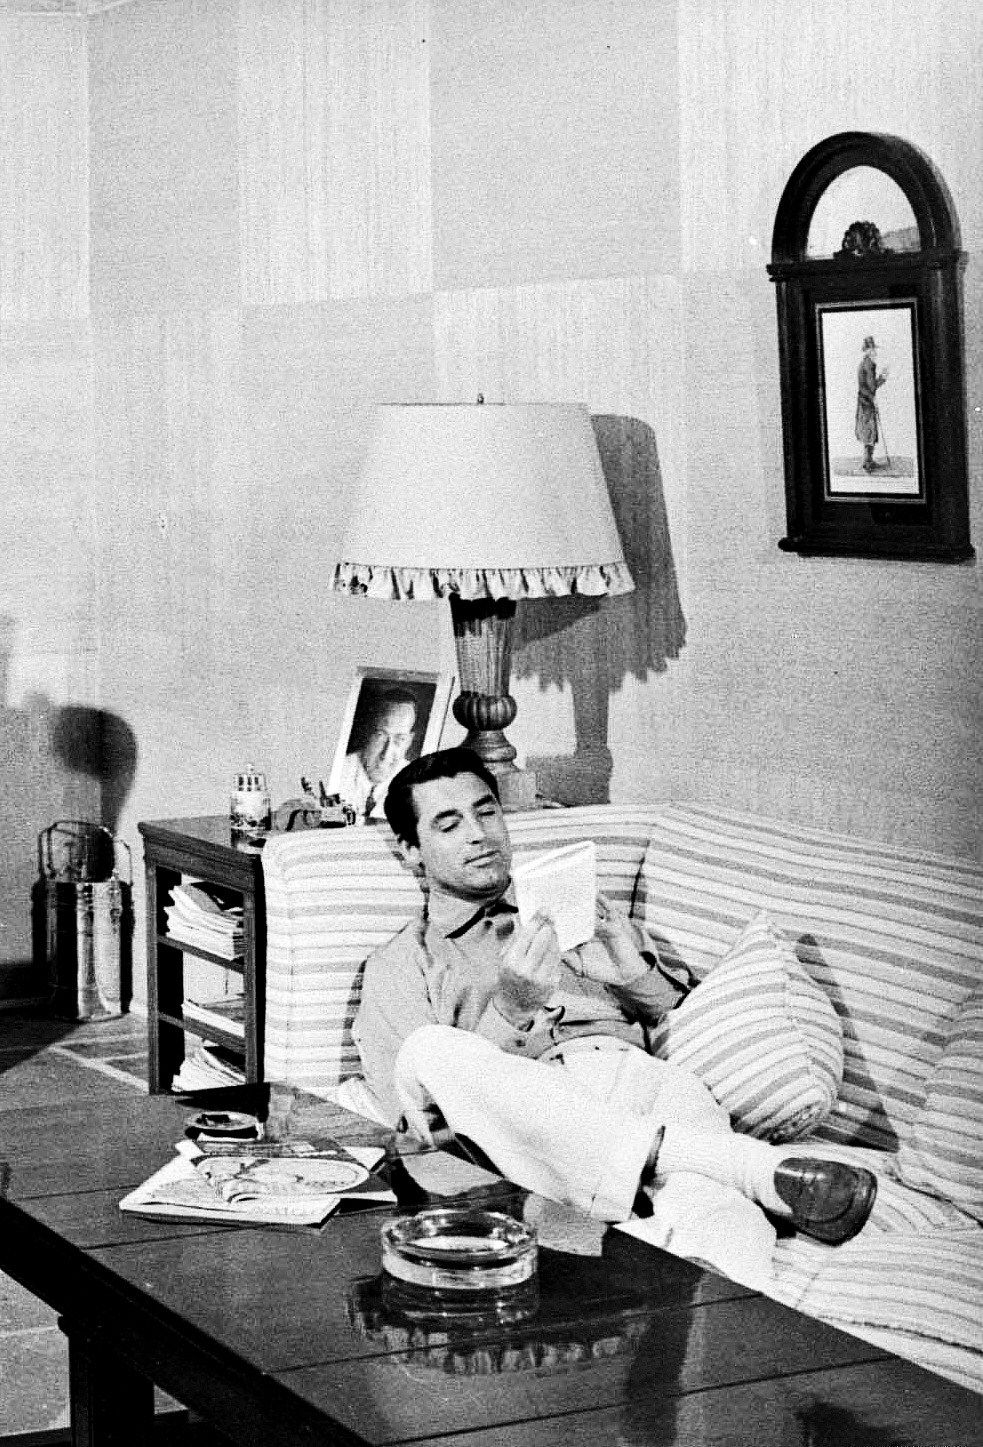 Cary Grant photographed at home by John Swope, 1952